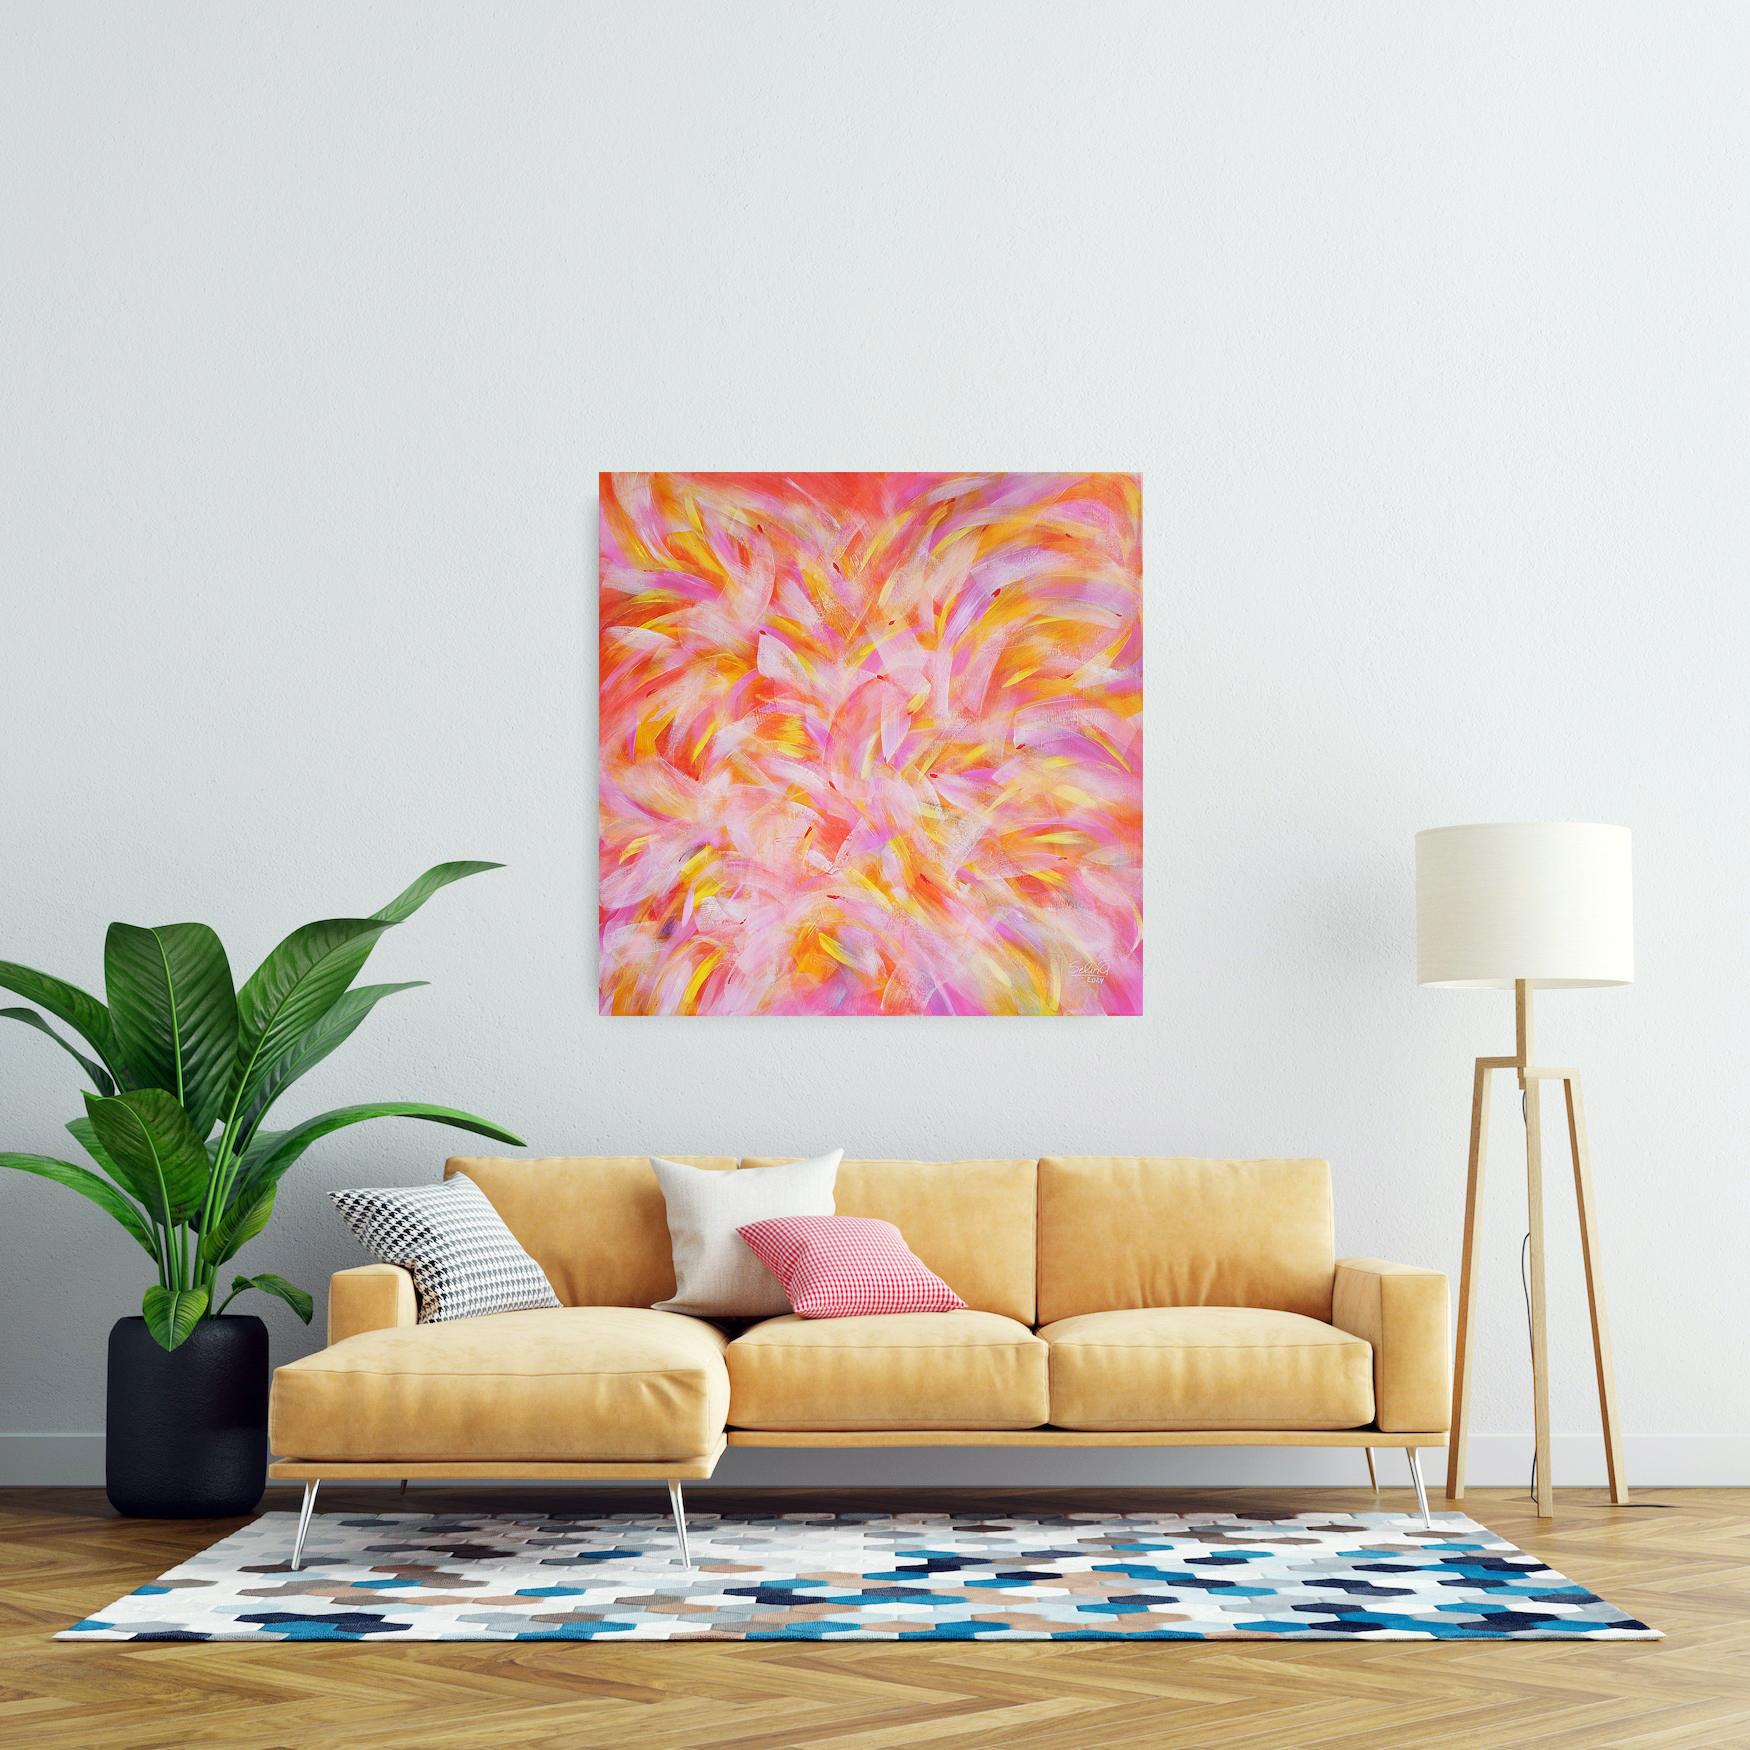 Fire of Life, Modern Colorful Abstract Painting 100x100cm by Anna Selina For Sale 4